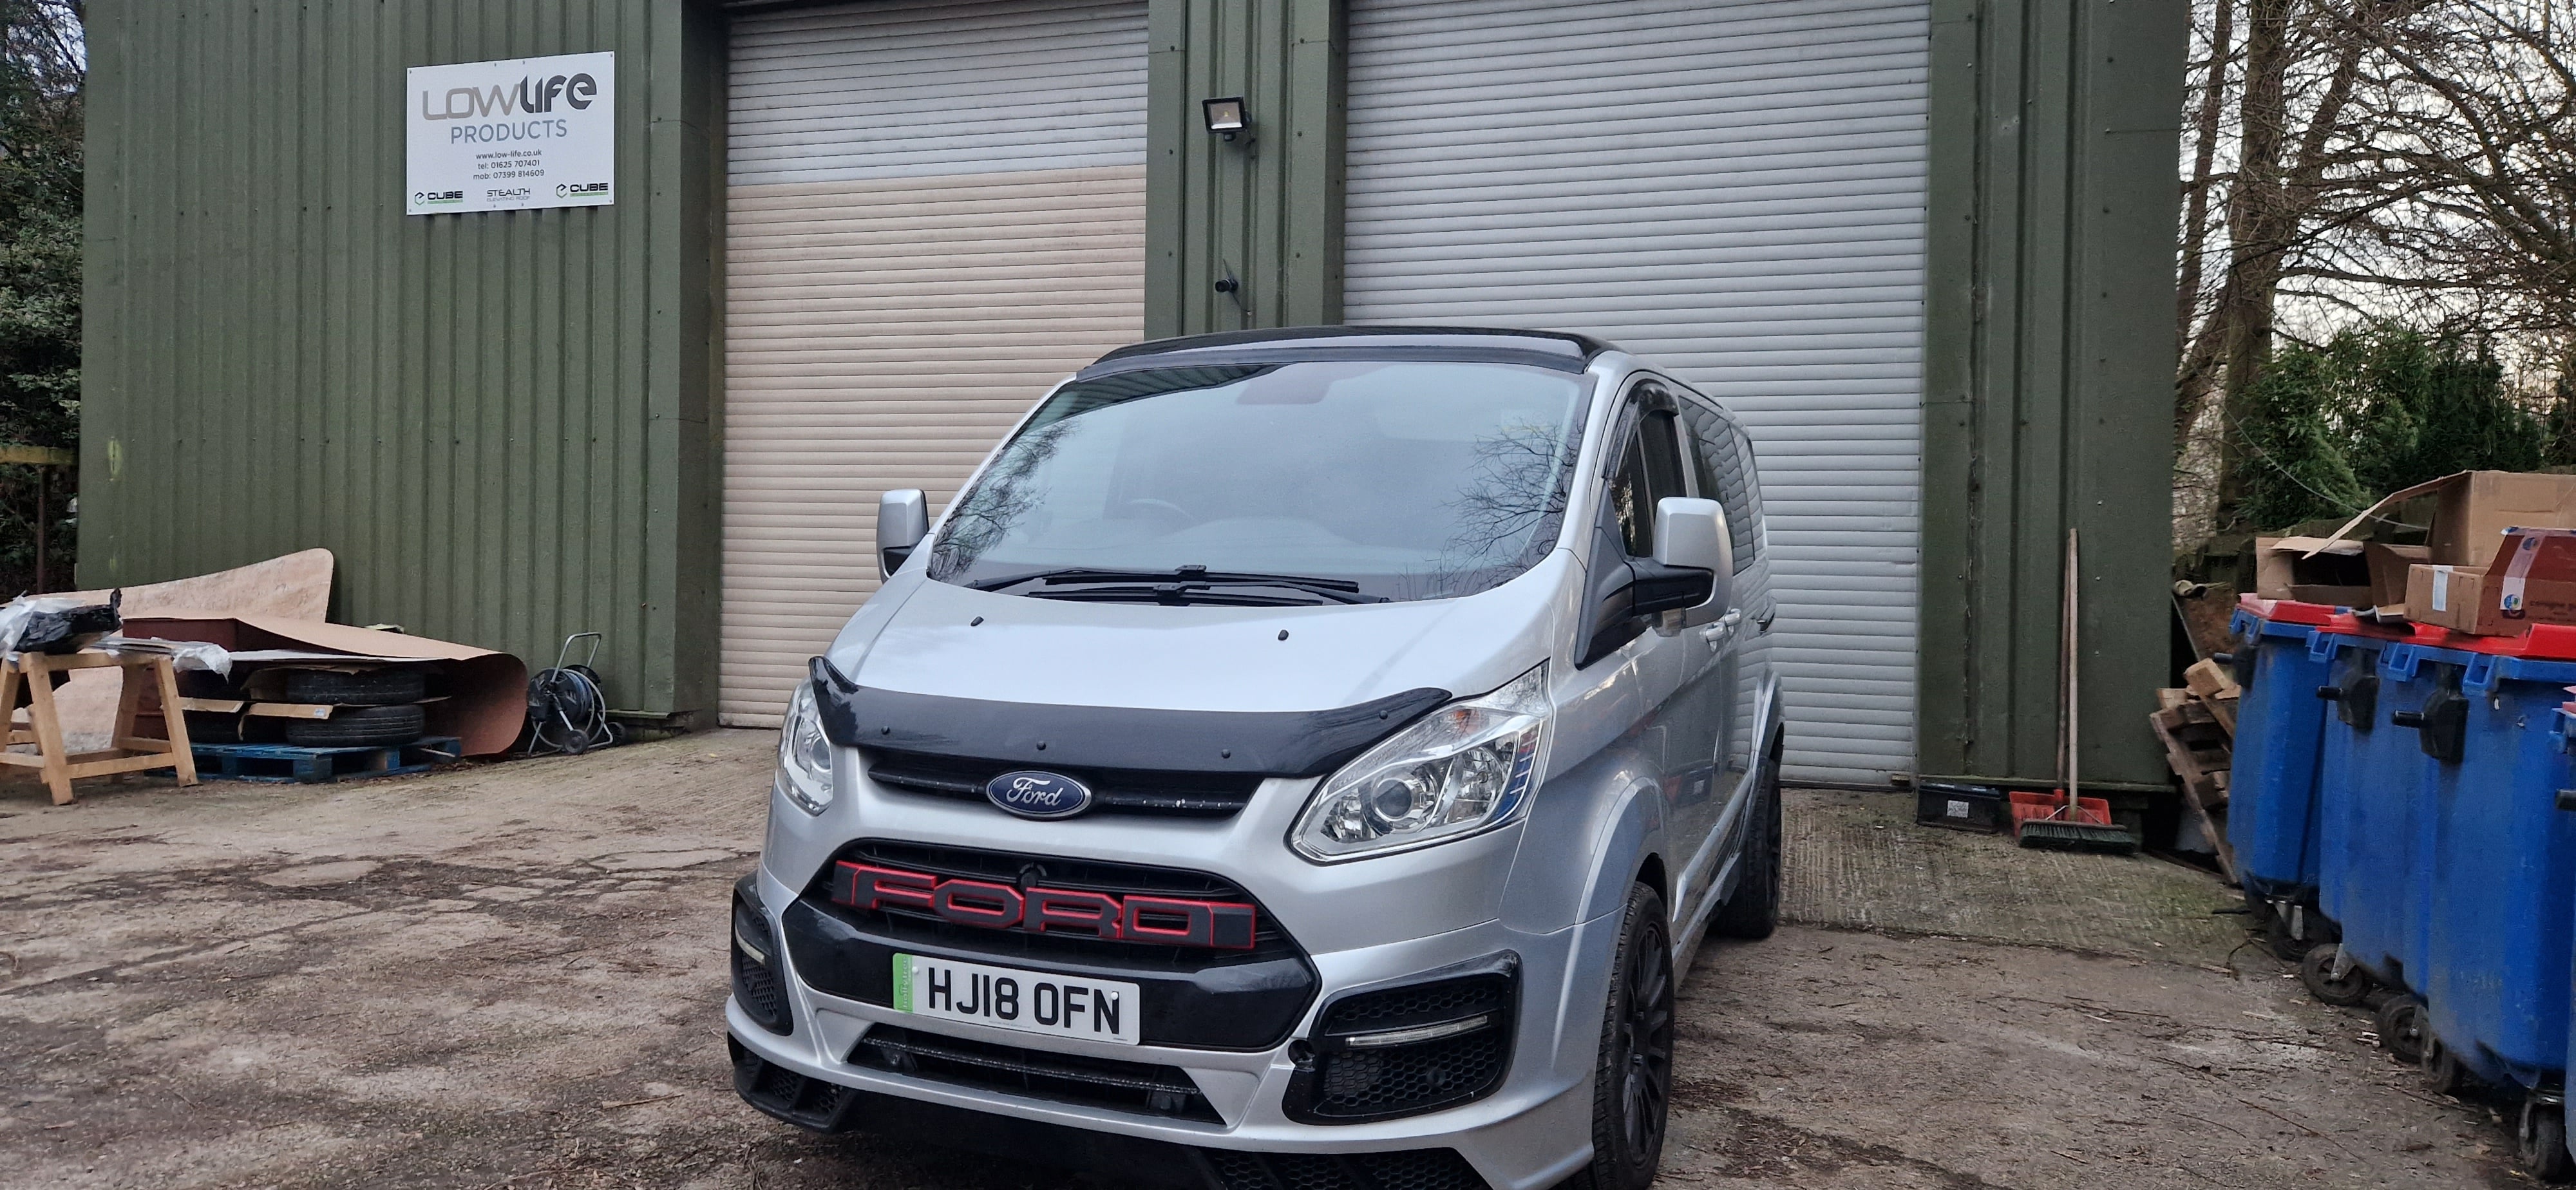 A ford transit custom parked in a garage ready for an unforgettable family staycation trip